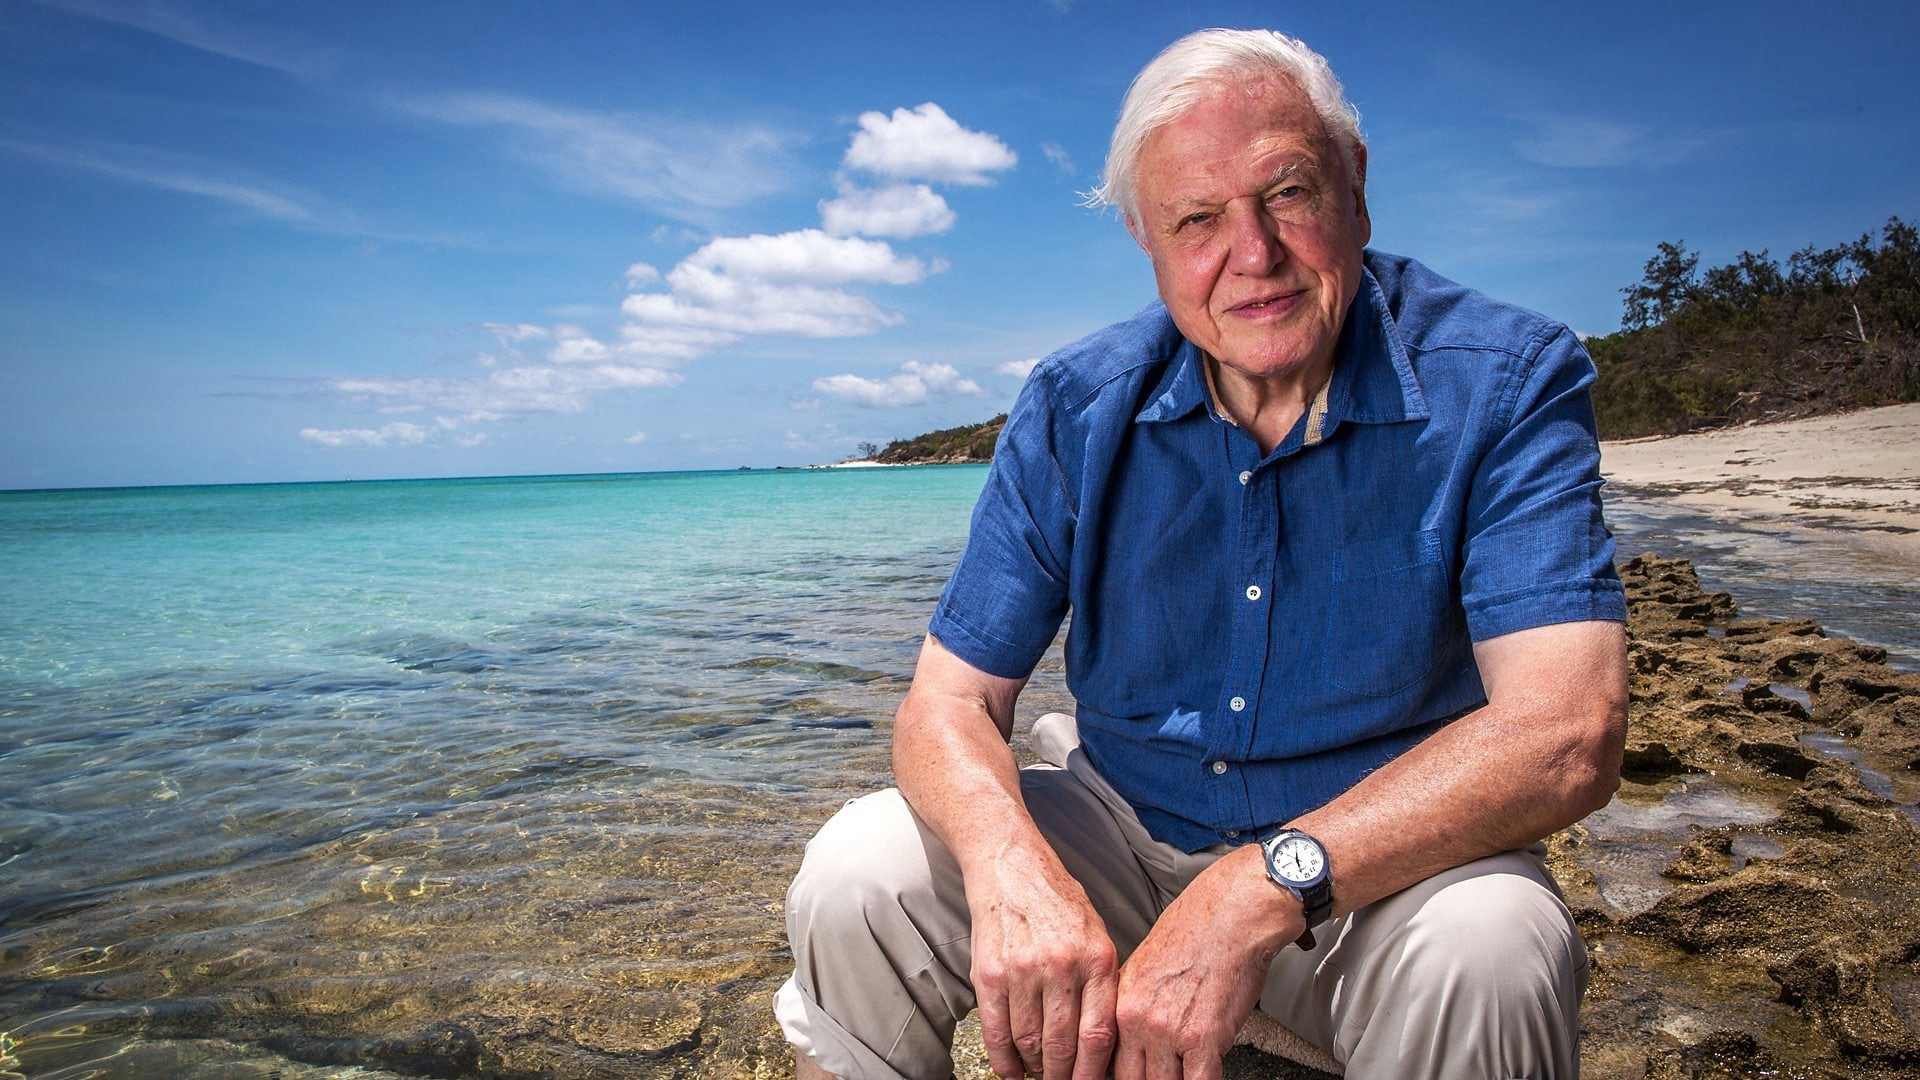 Great Barrier Reef with David Attenborough / Great Barrier Reef with David Attenborough (2015)